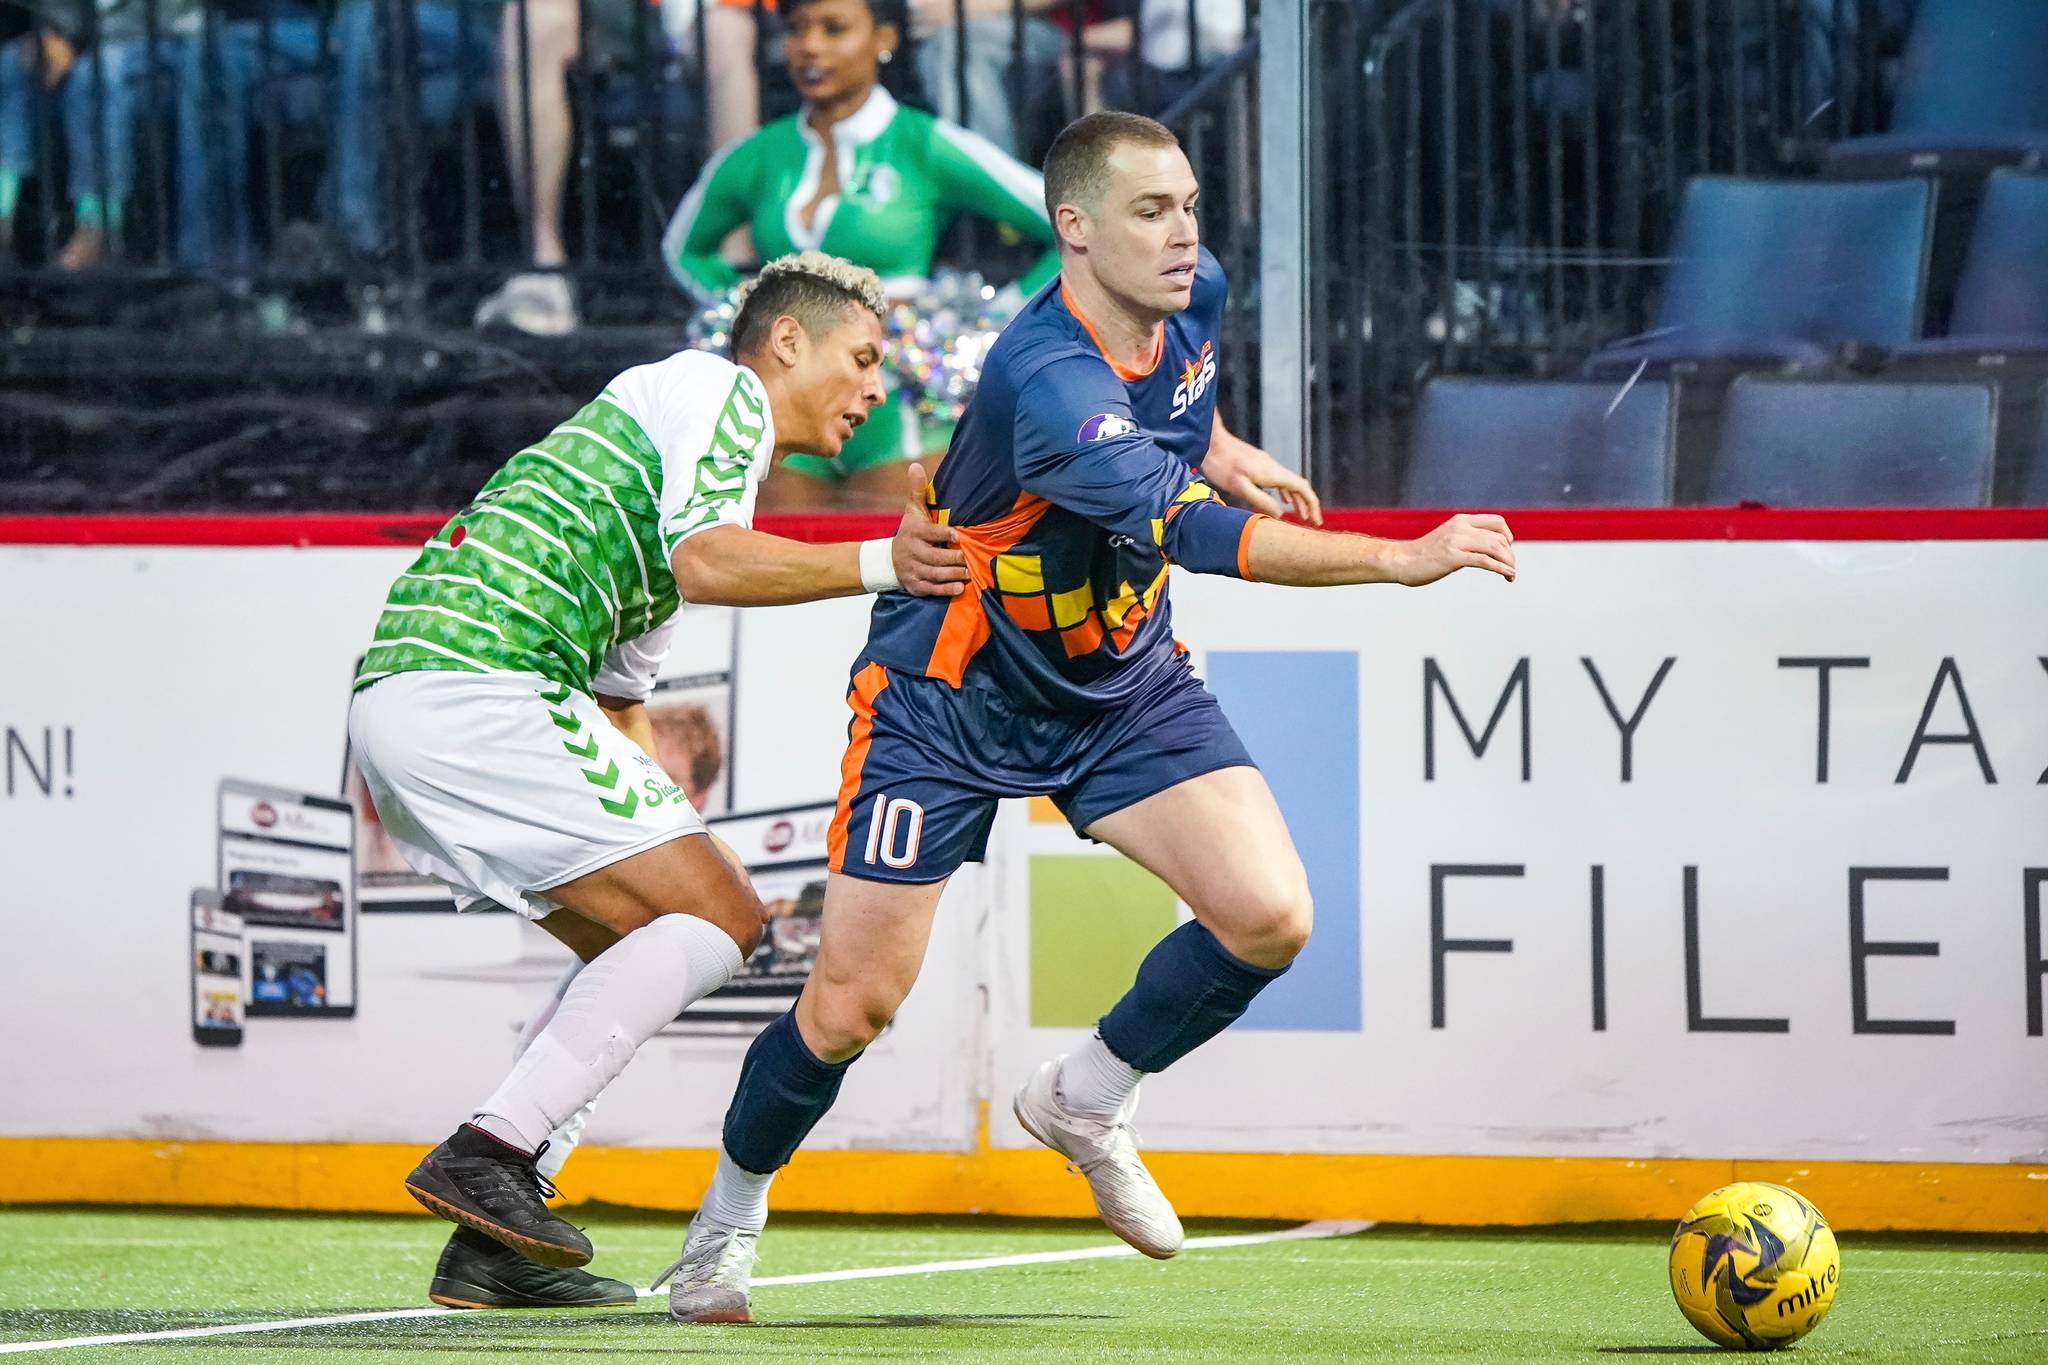 The Stars’ Nick Perera drives the ball up the field against a Sidekick defender during MASL play in Dallas on Saturday night. COURTESY, Michael Lark Photography